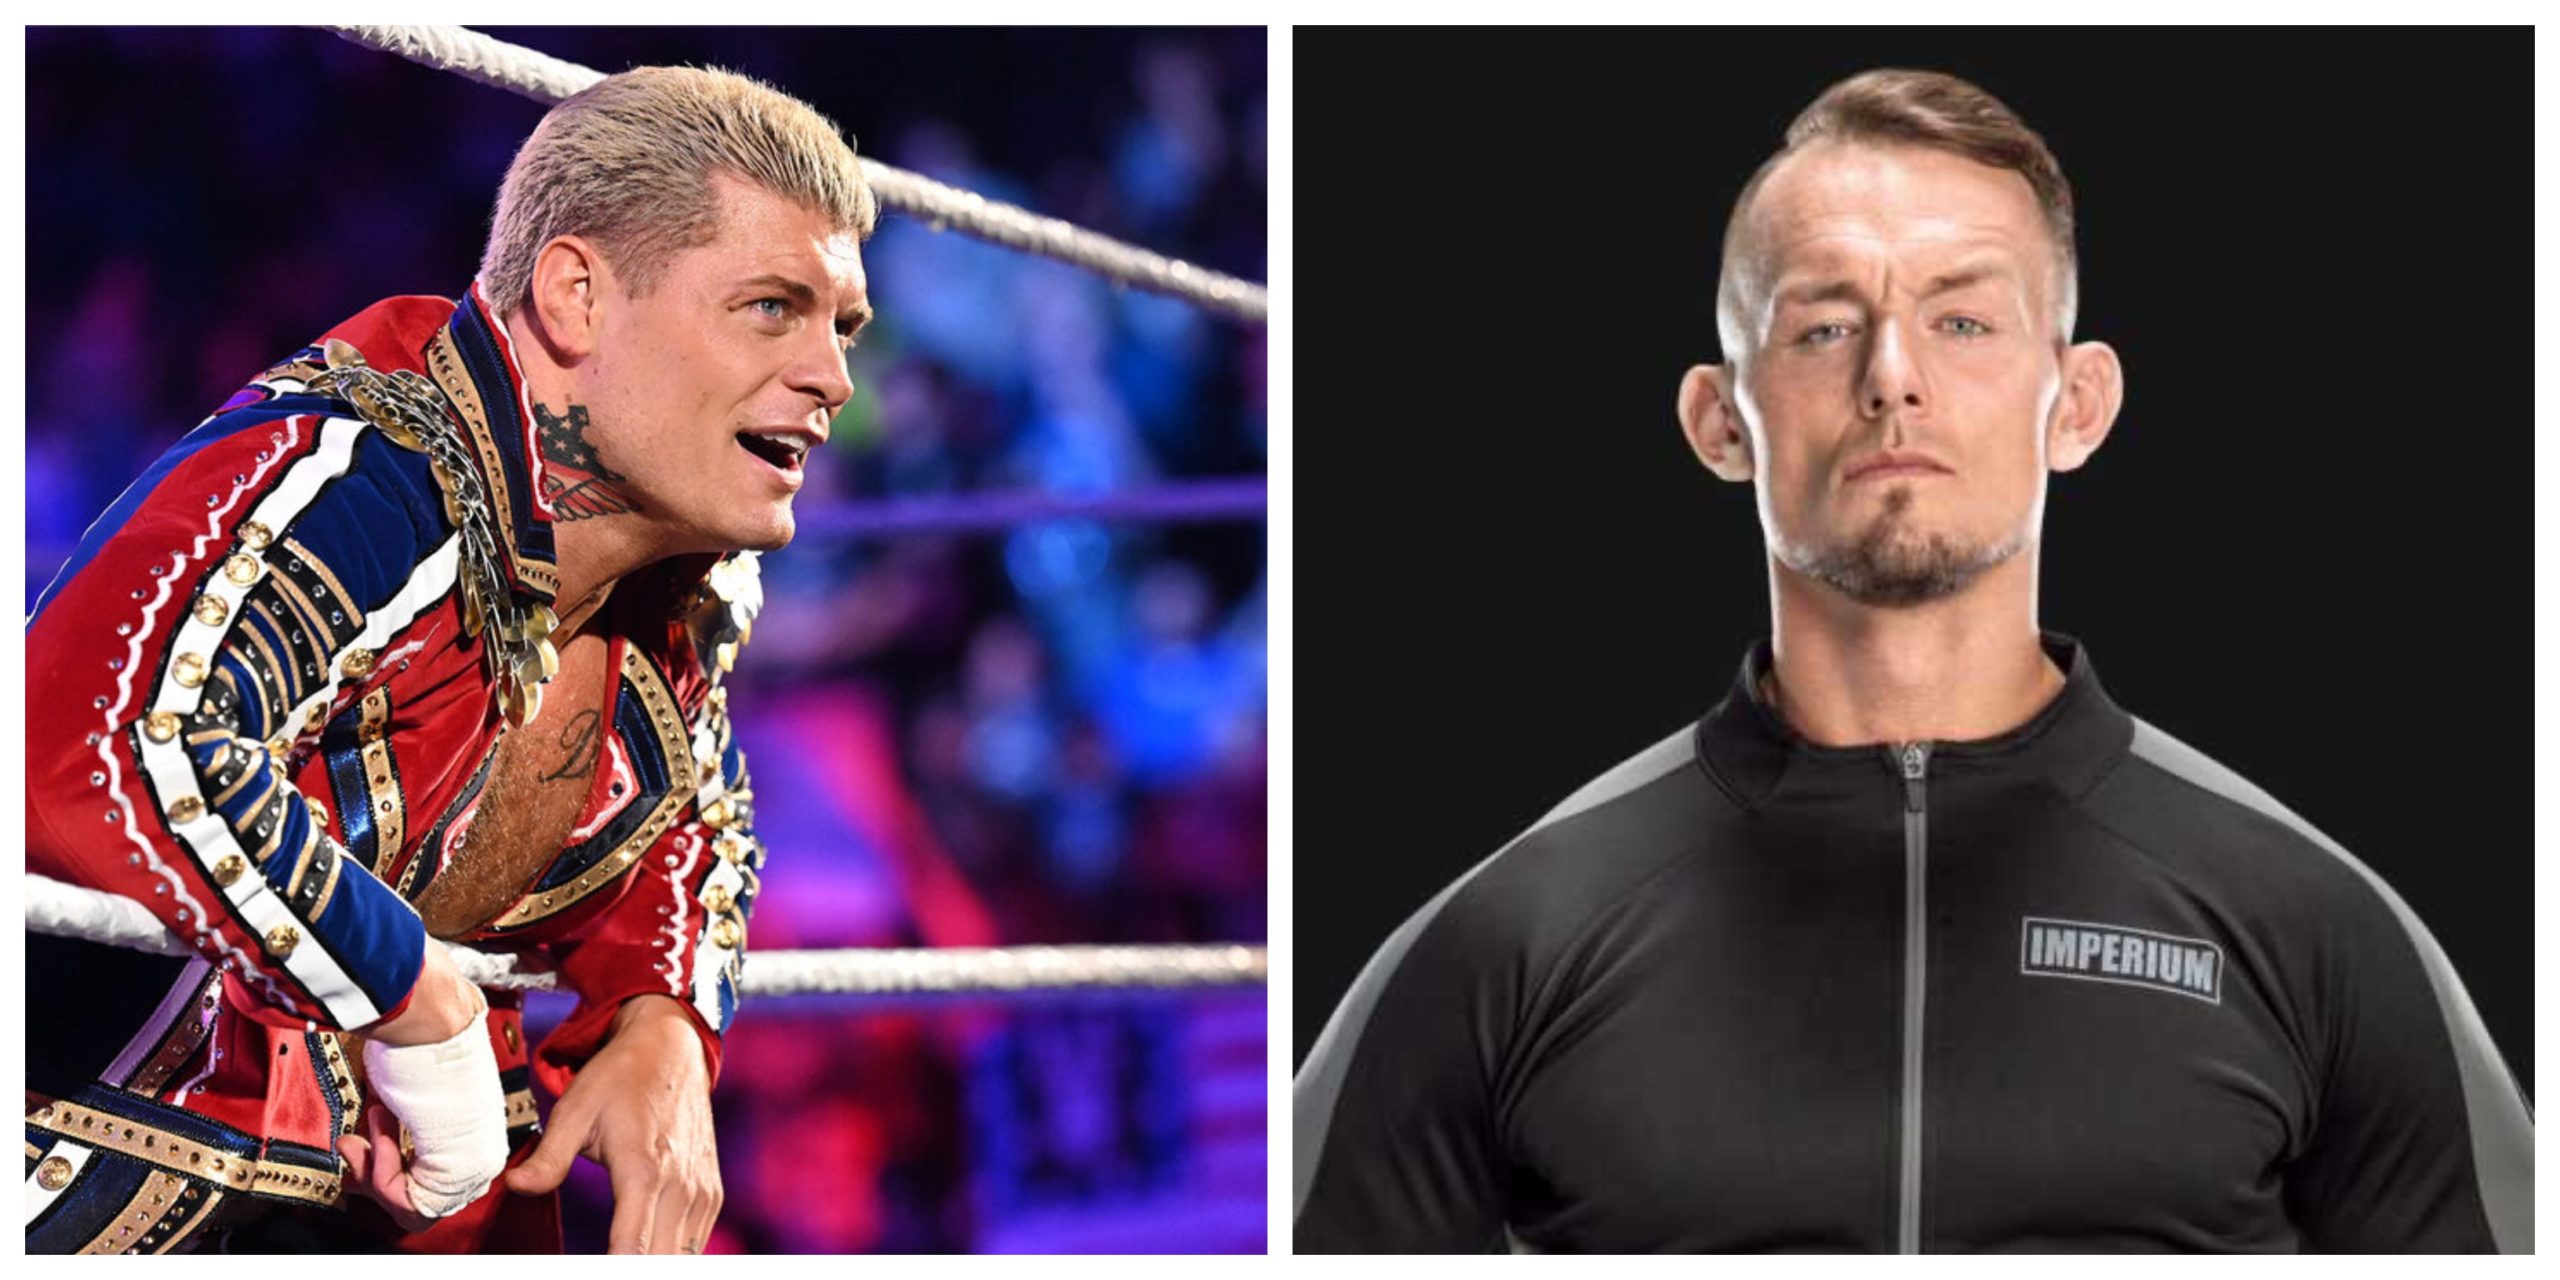 Cody Rhodes vs. Ludwig Kaiser added to next week’s SmackDown